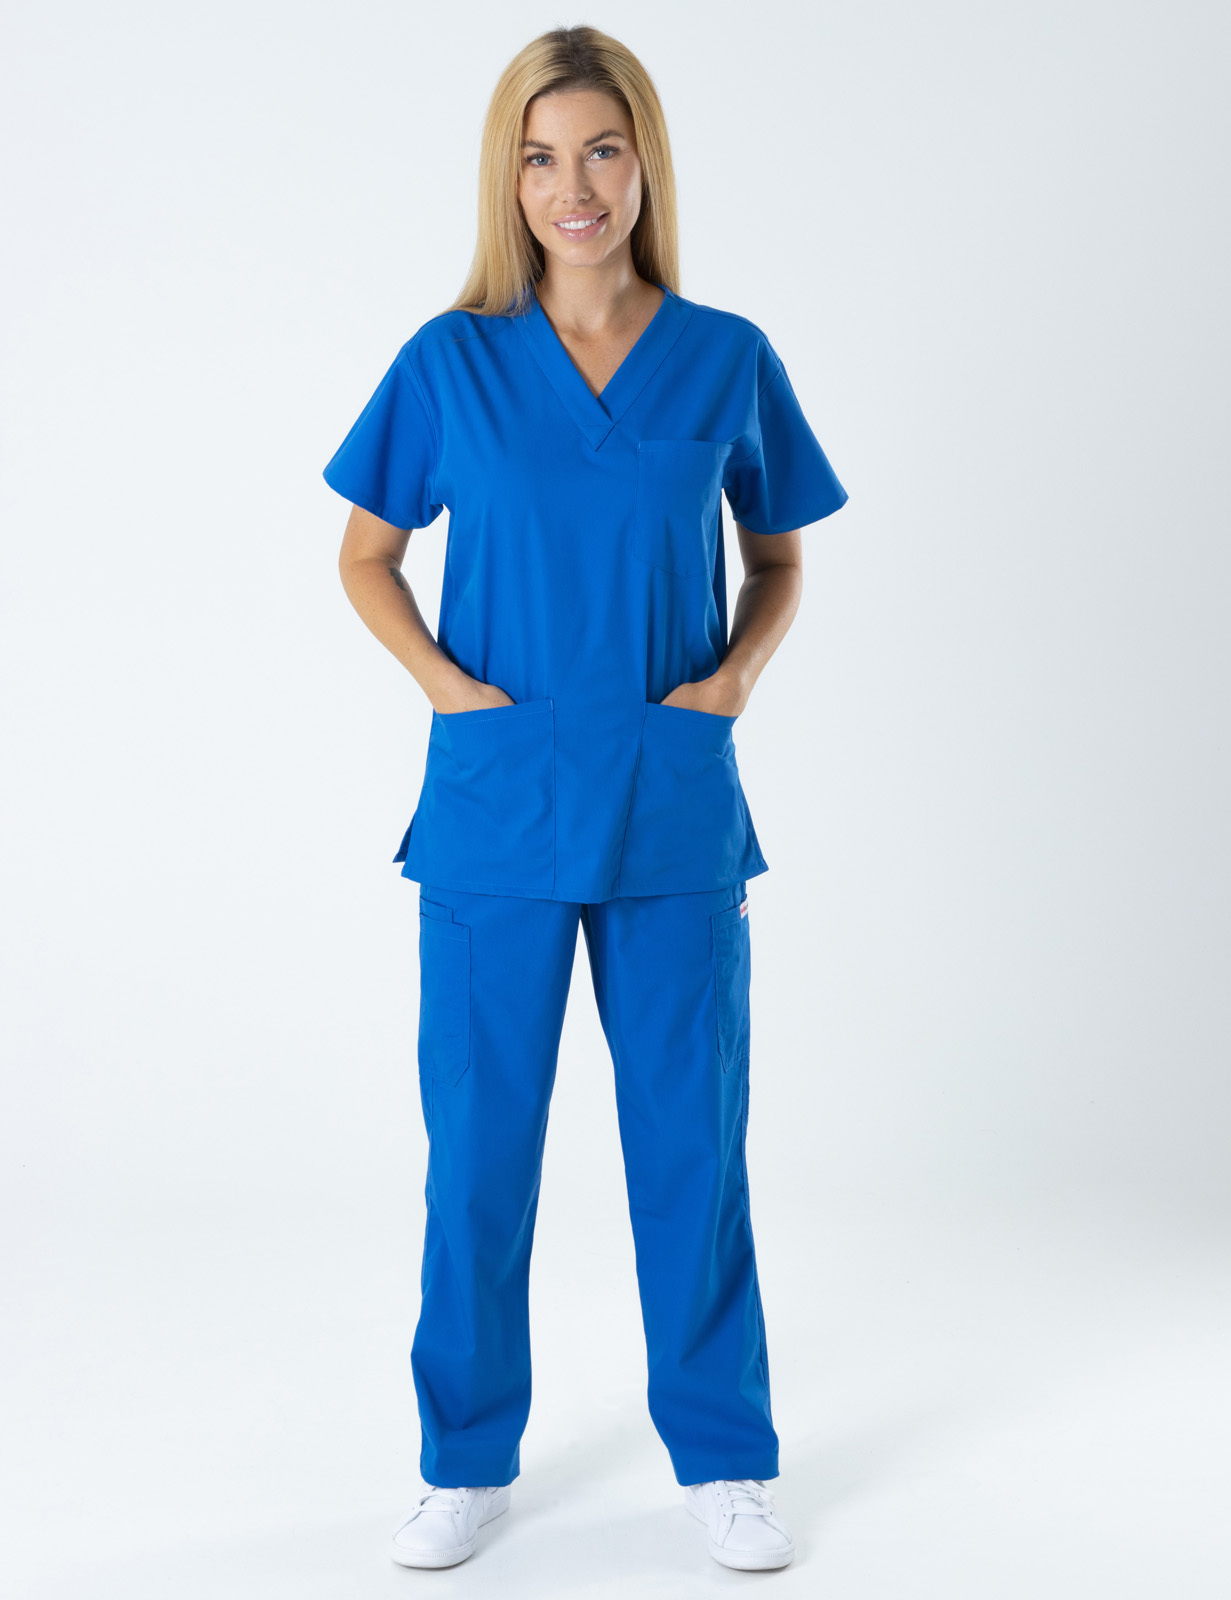 Nambour Hospital - MI Sonographer (4 Pocket Scrub Top and Cargo Pants in Royal incl Logos)